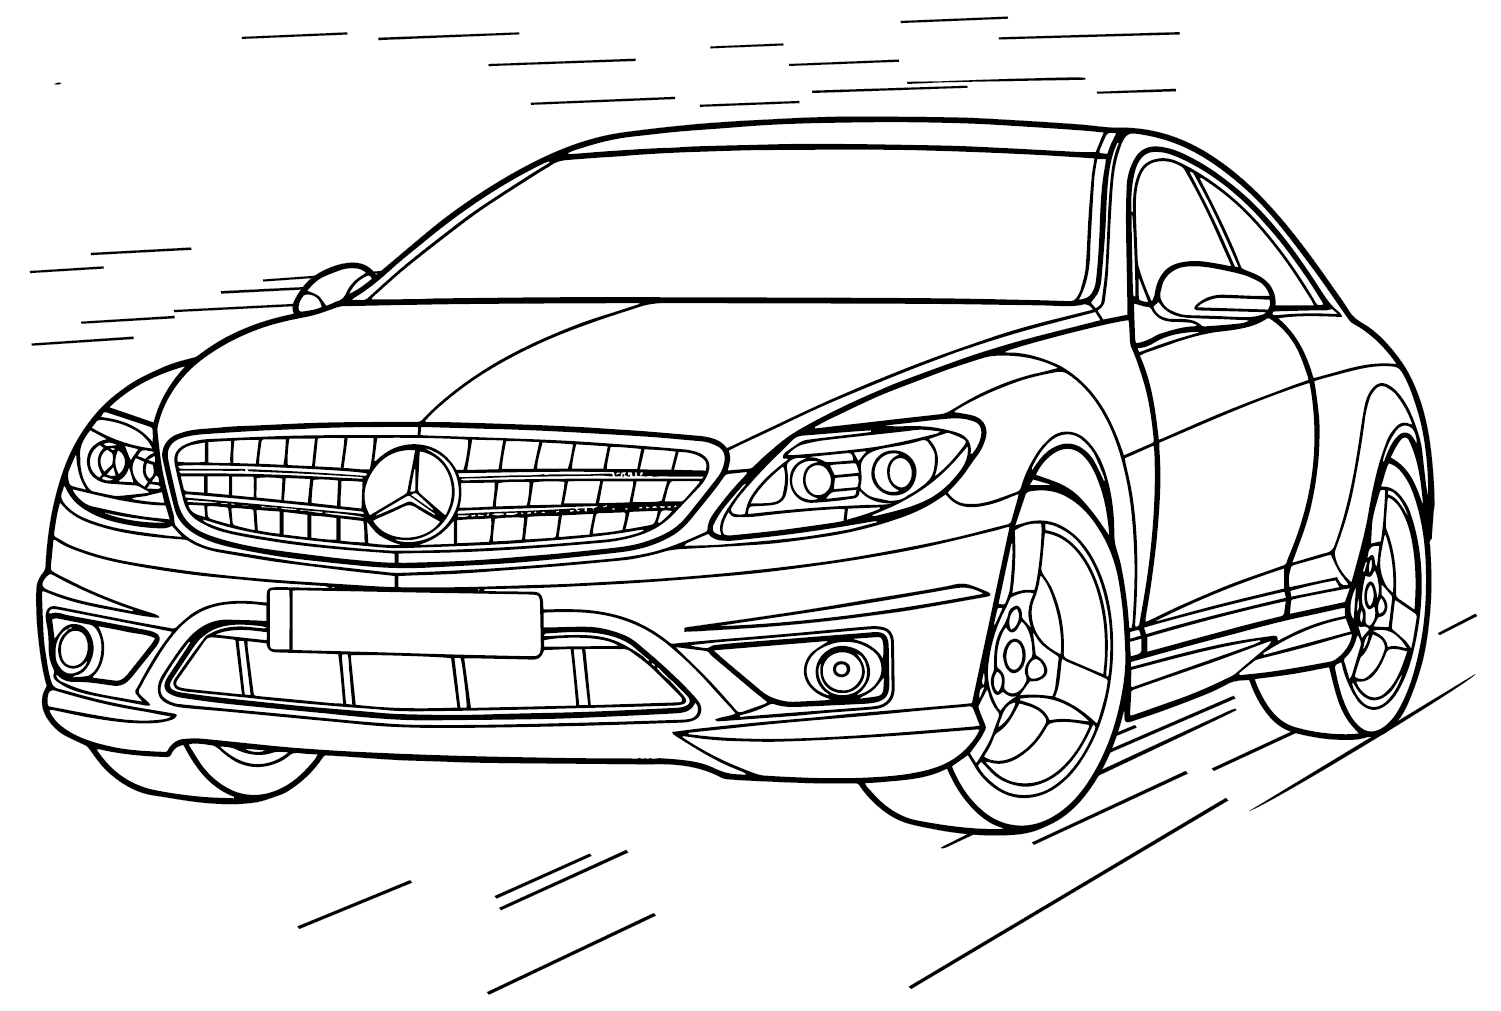 Mercedes-Benz CL-Class Coloring Page from Mercedes-Benz